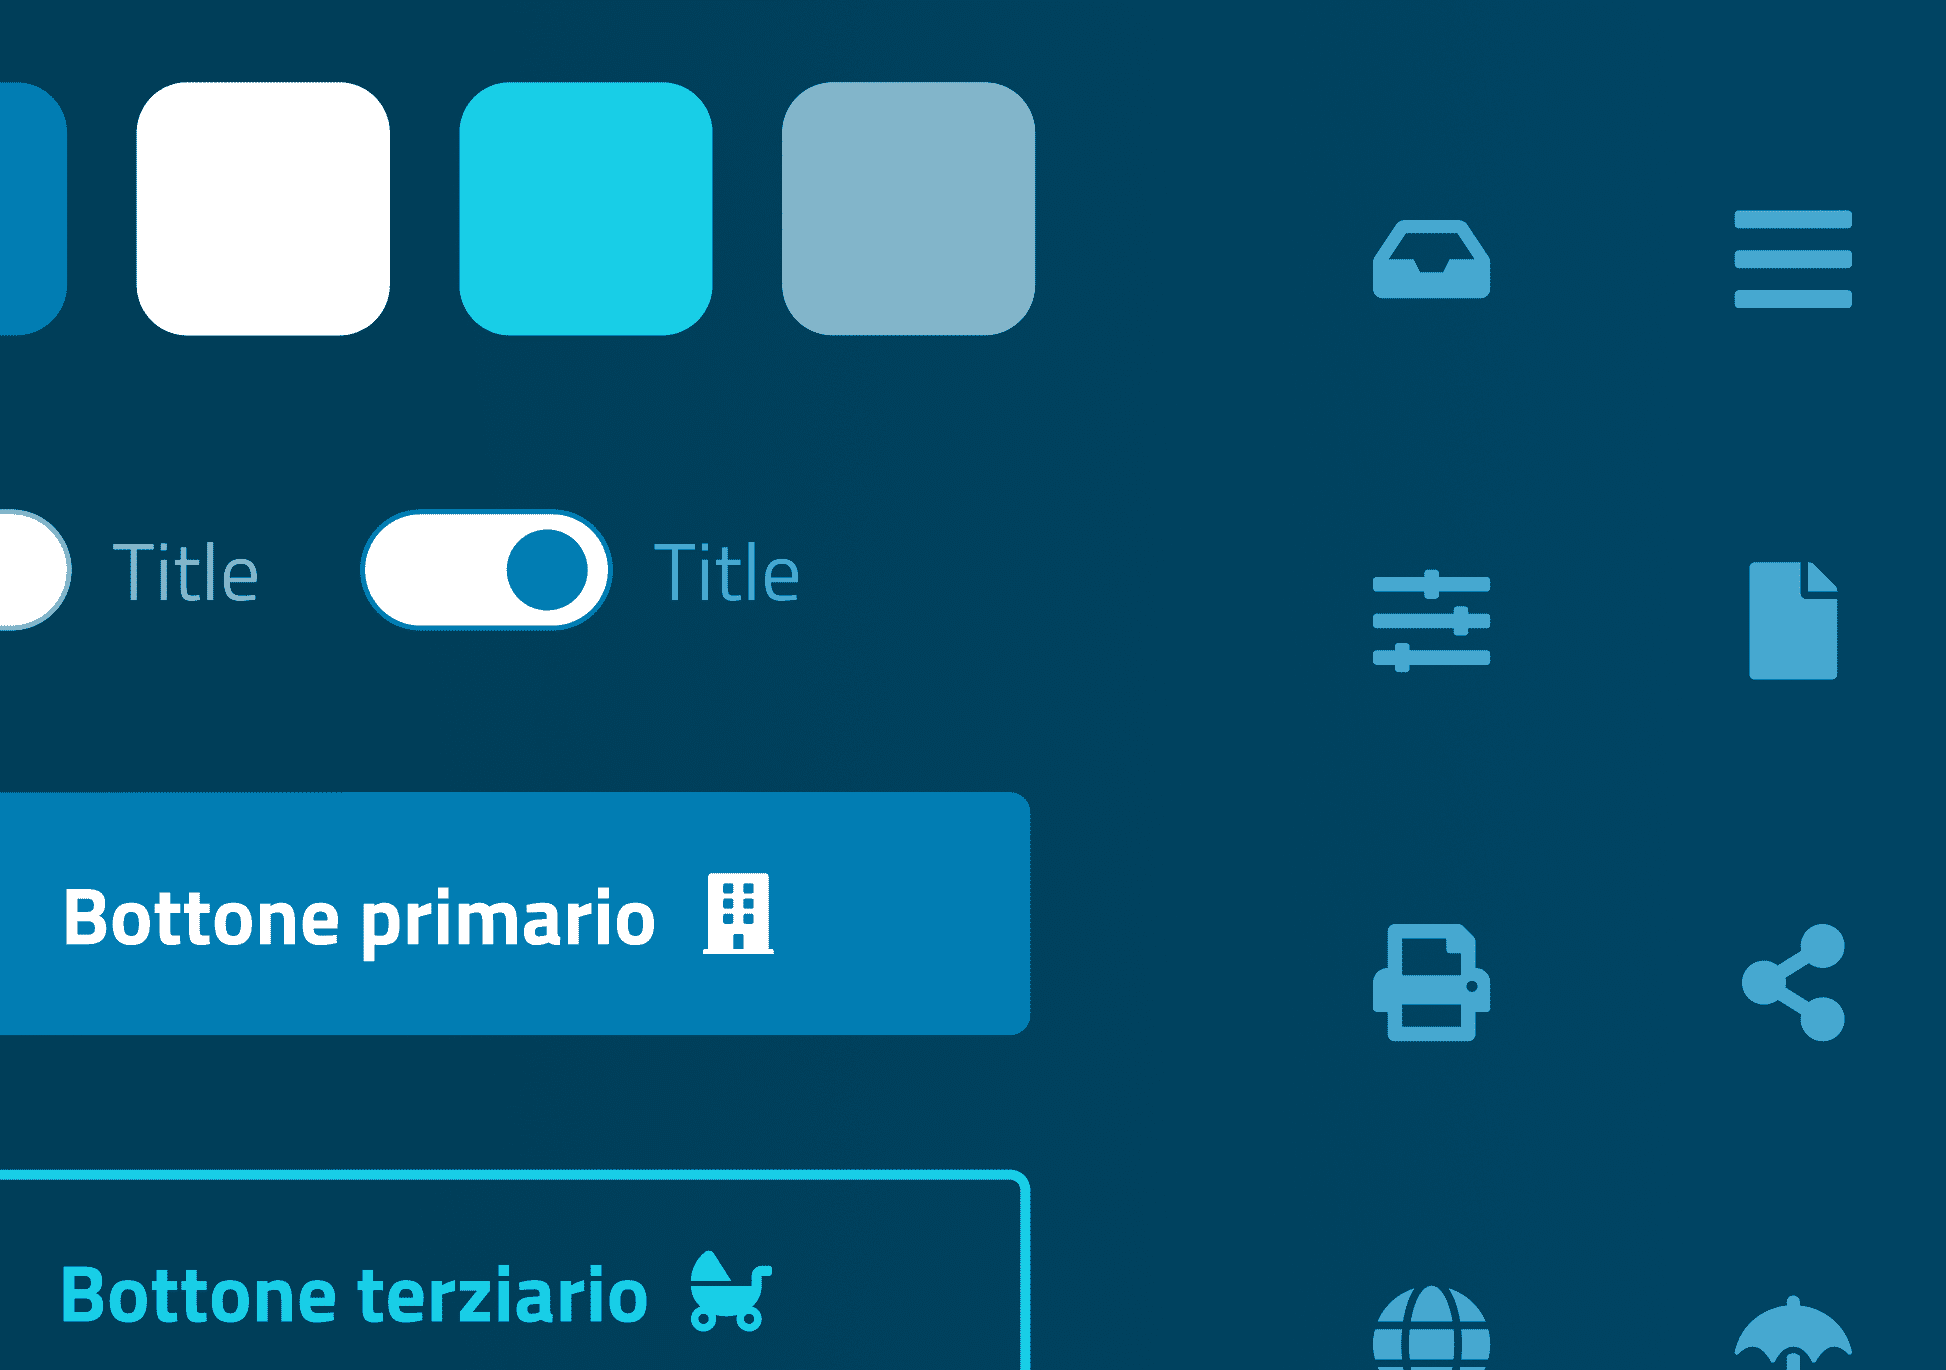 Detail of some components and icons of Sirio, design system of INPS